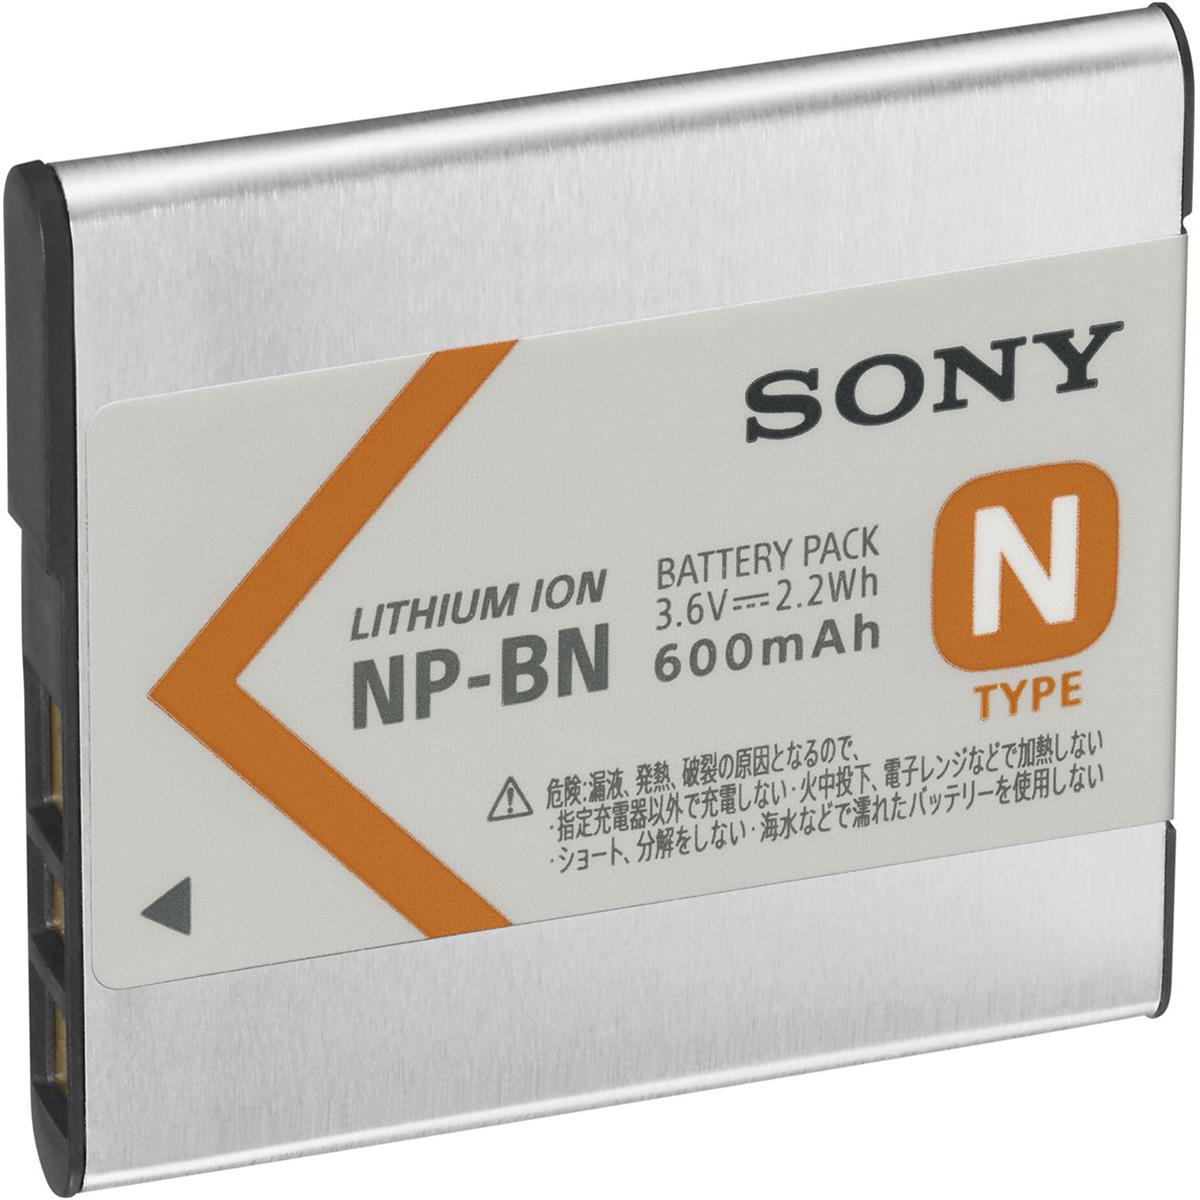 

Sony NP-BN DC3.6V N-Type Lithium-Ion Rechargeable Battery Pack